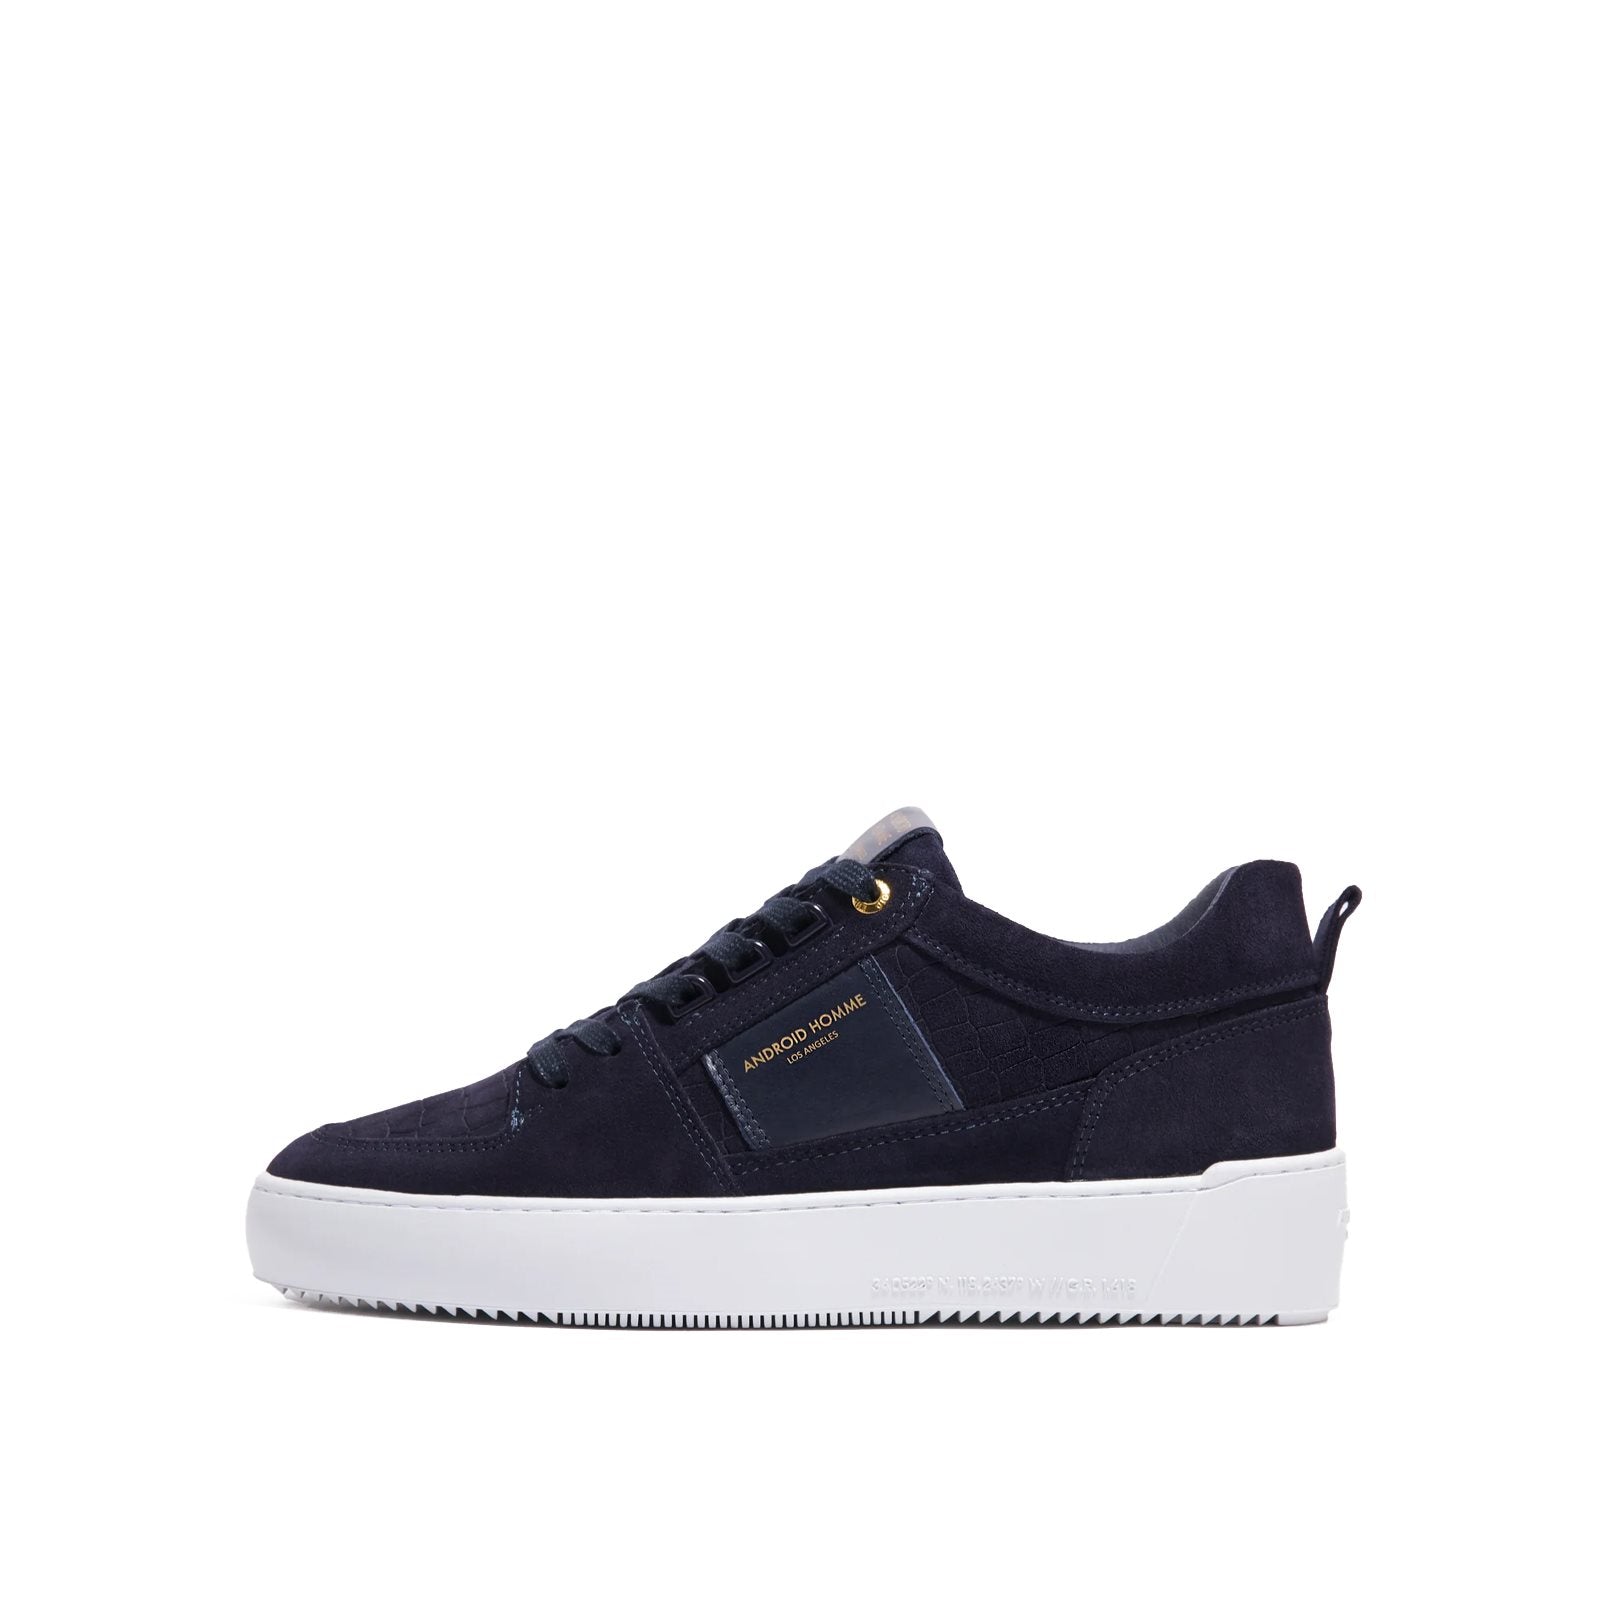 Point dume low-top sneakers